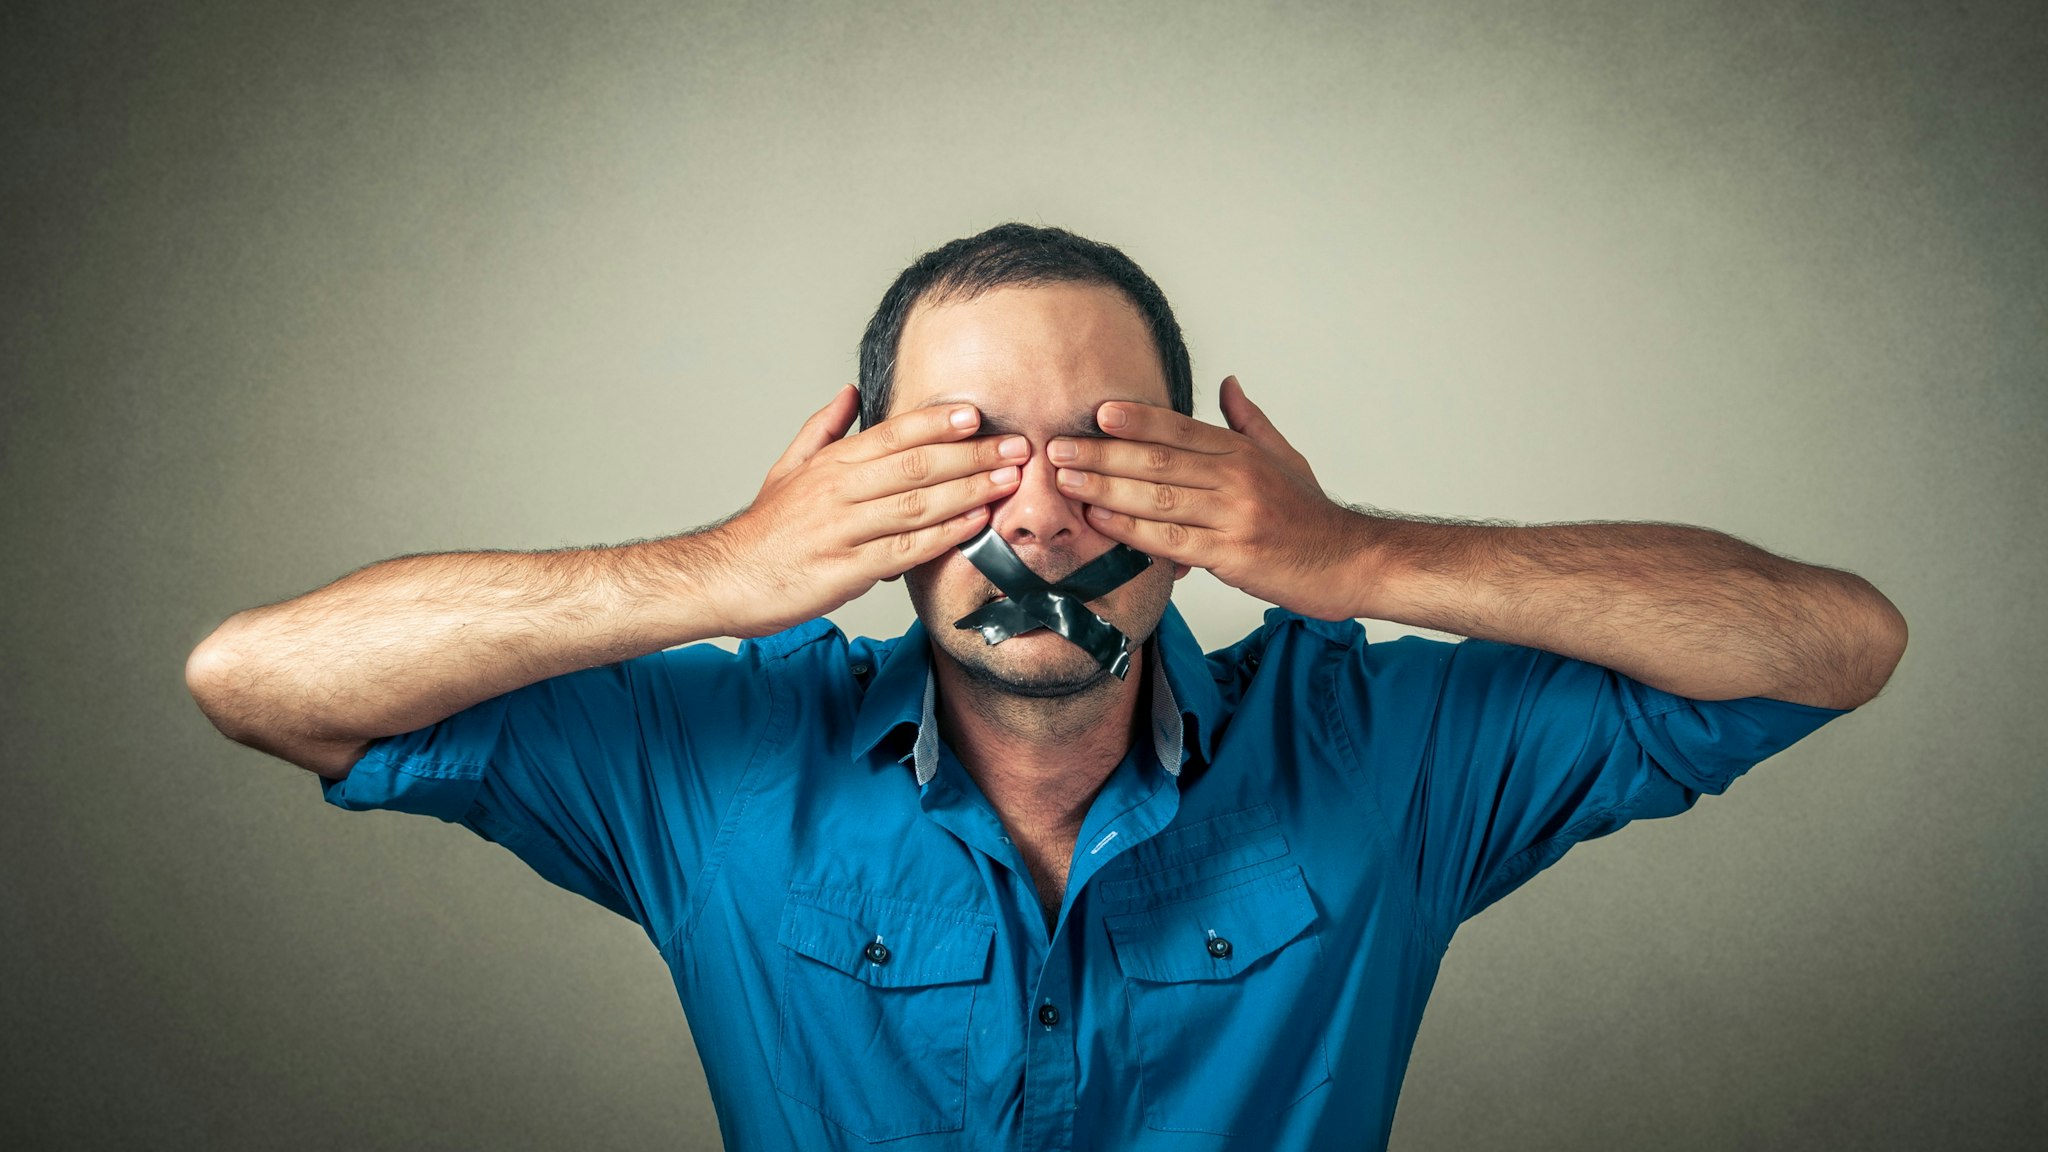 Portrait Of Scared Mid Adult Man With Black Adhesive Tape On Mouth Covering Eyes Against Gray Background - stock photo